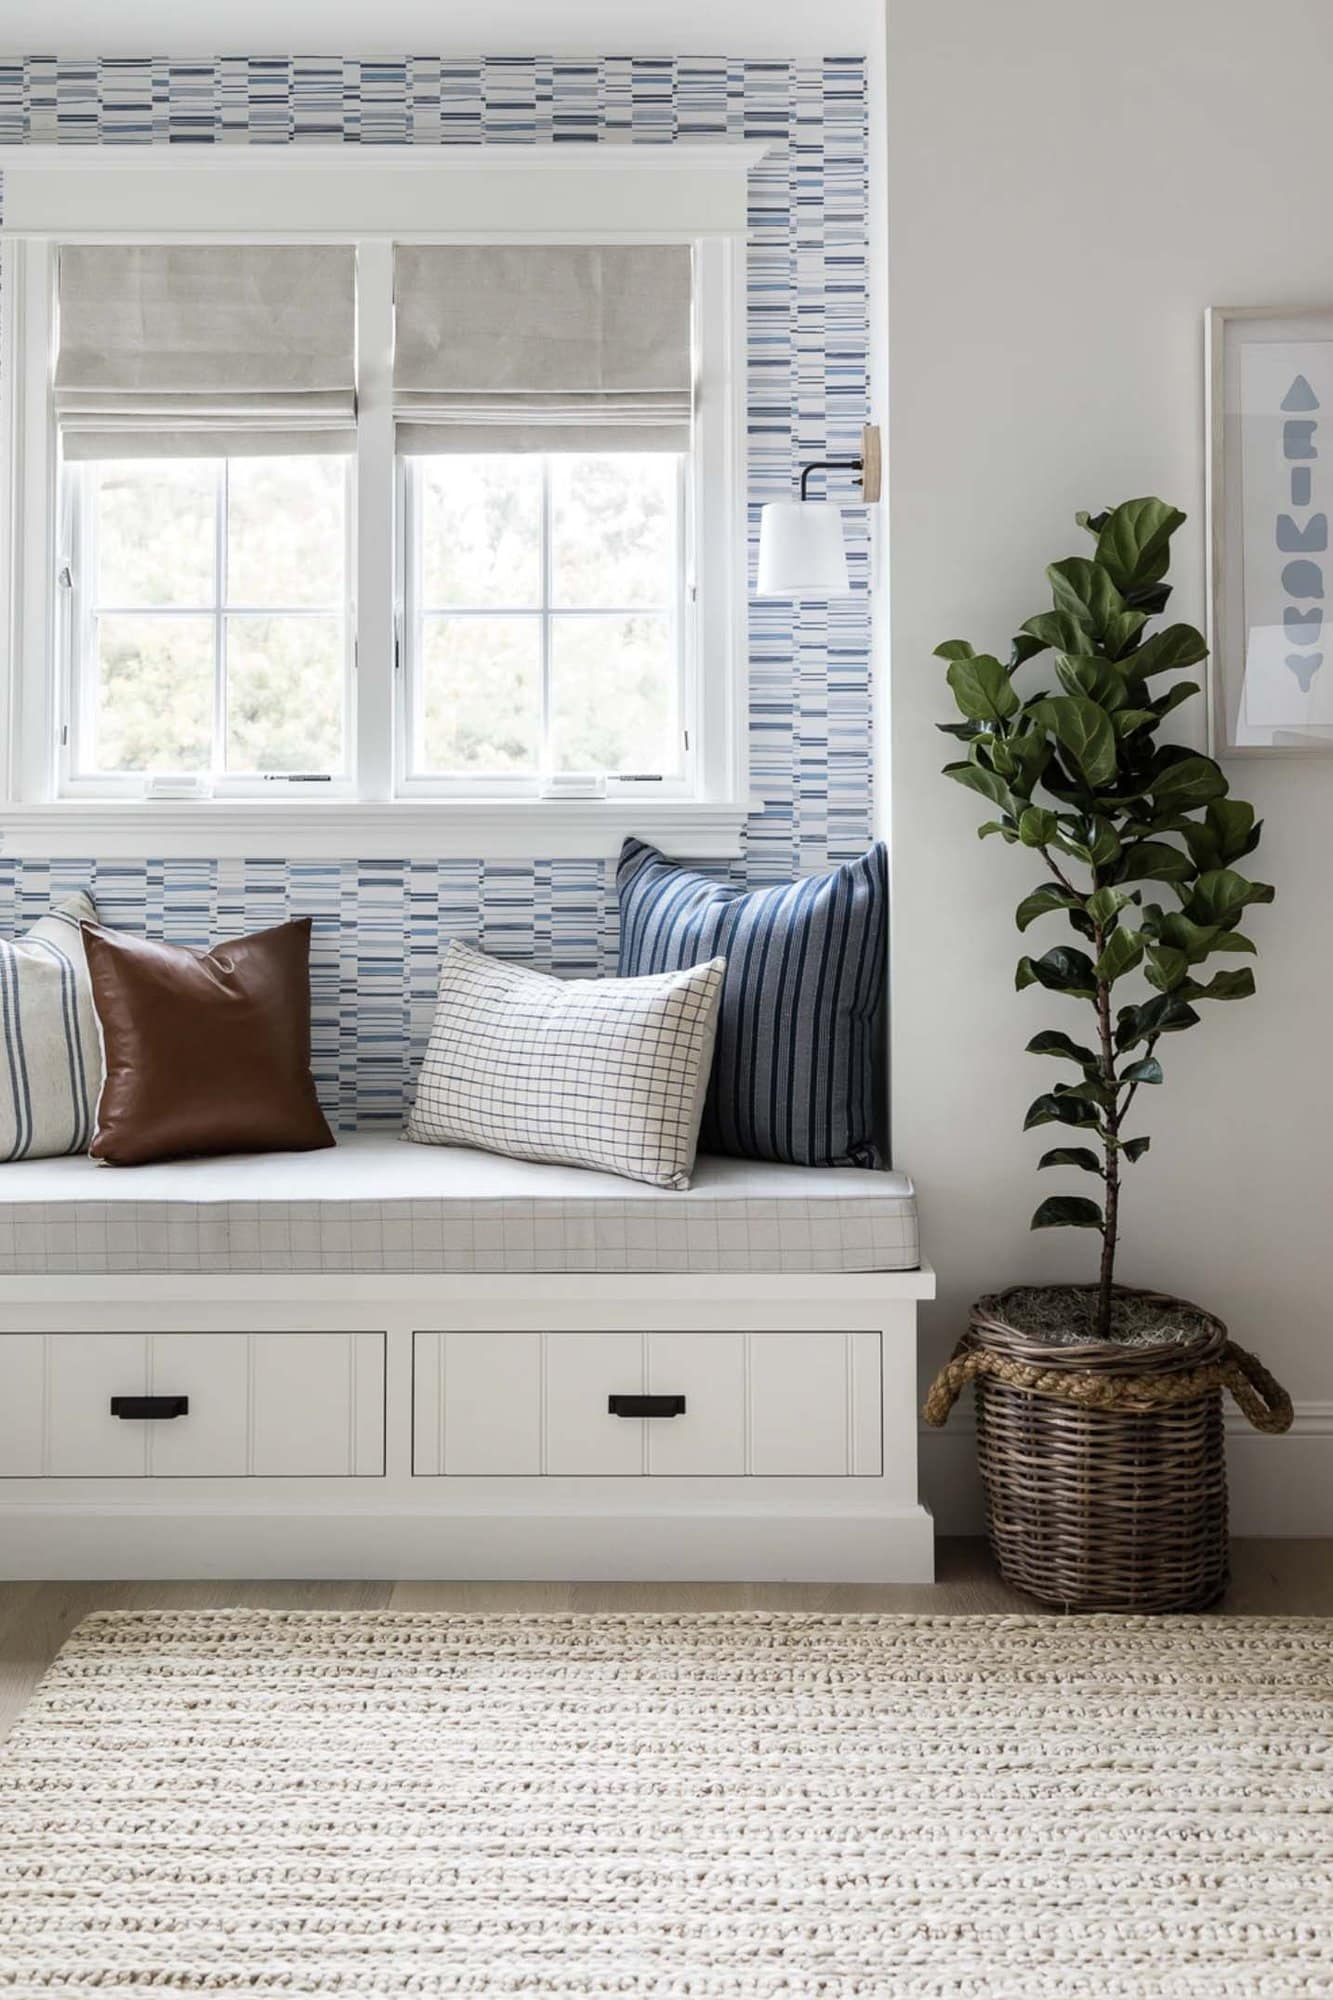 traditional style boys bunk bedroom built-in window seat